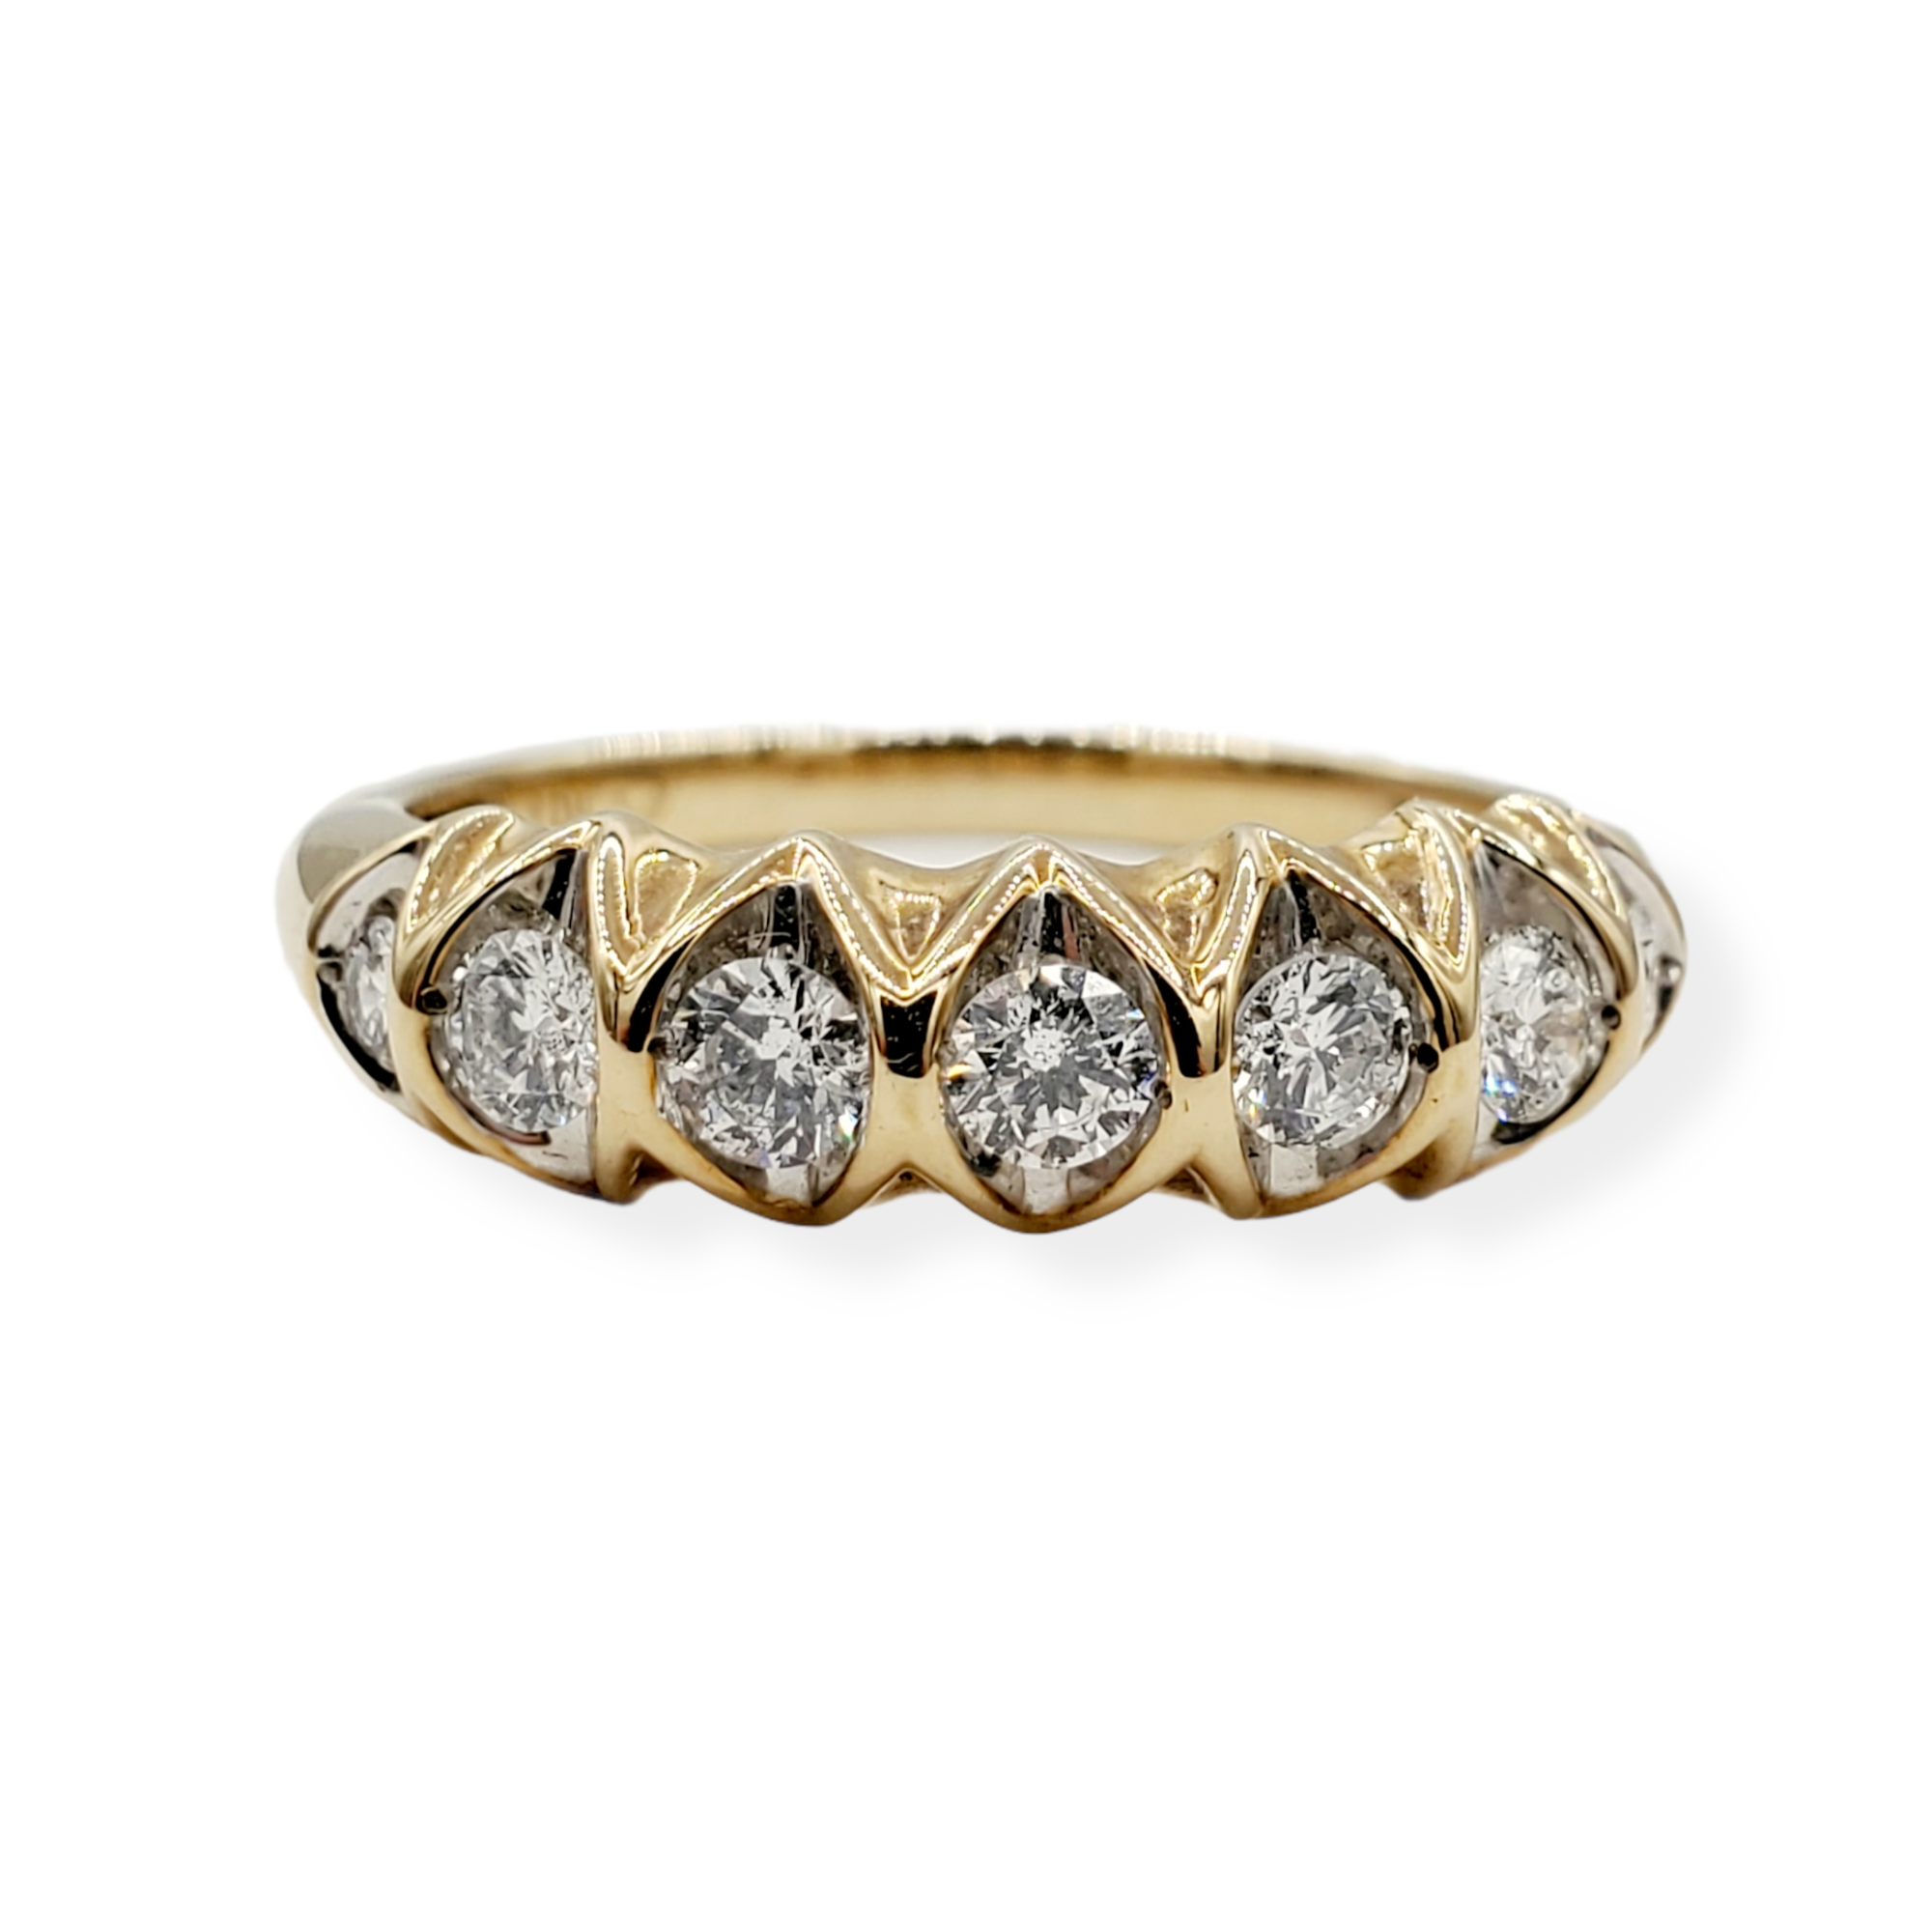 10kt yellow and white gold ring with seven v-prong set round brilliant cut diamonds 0.50ct